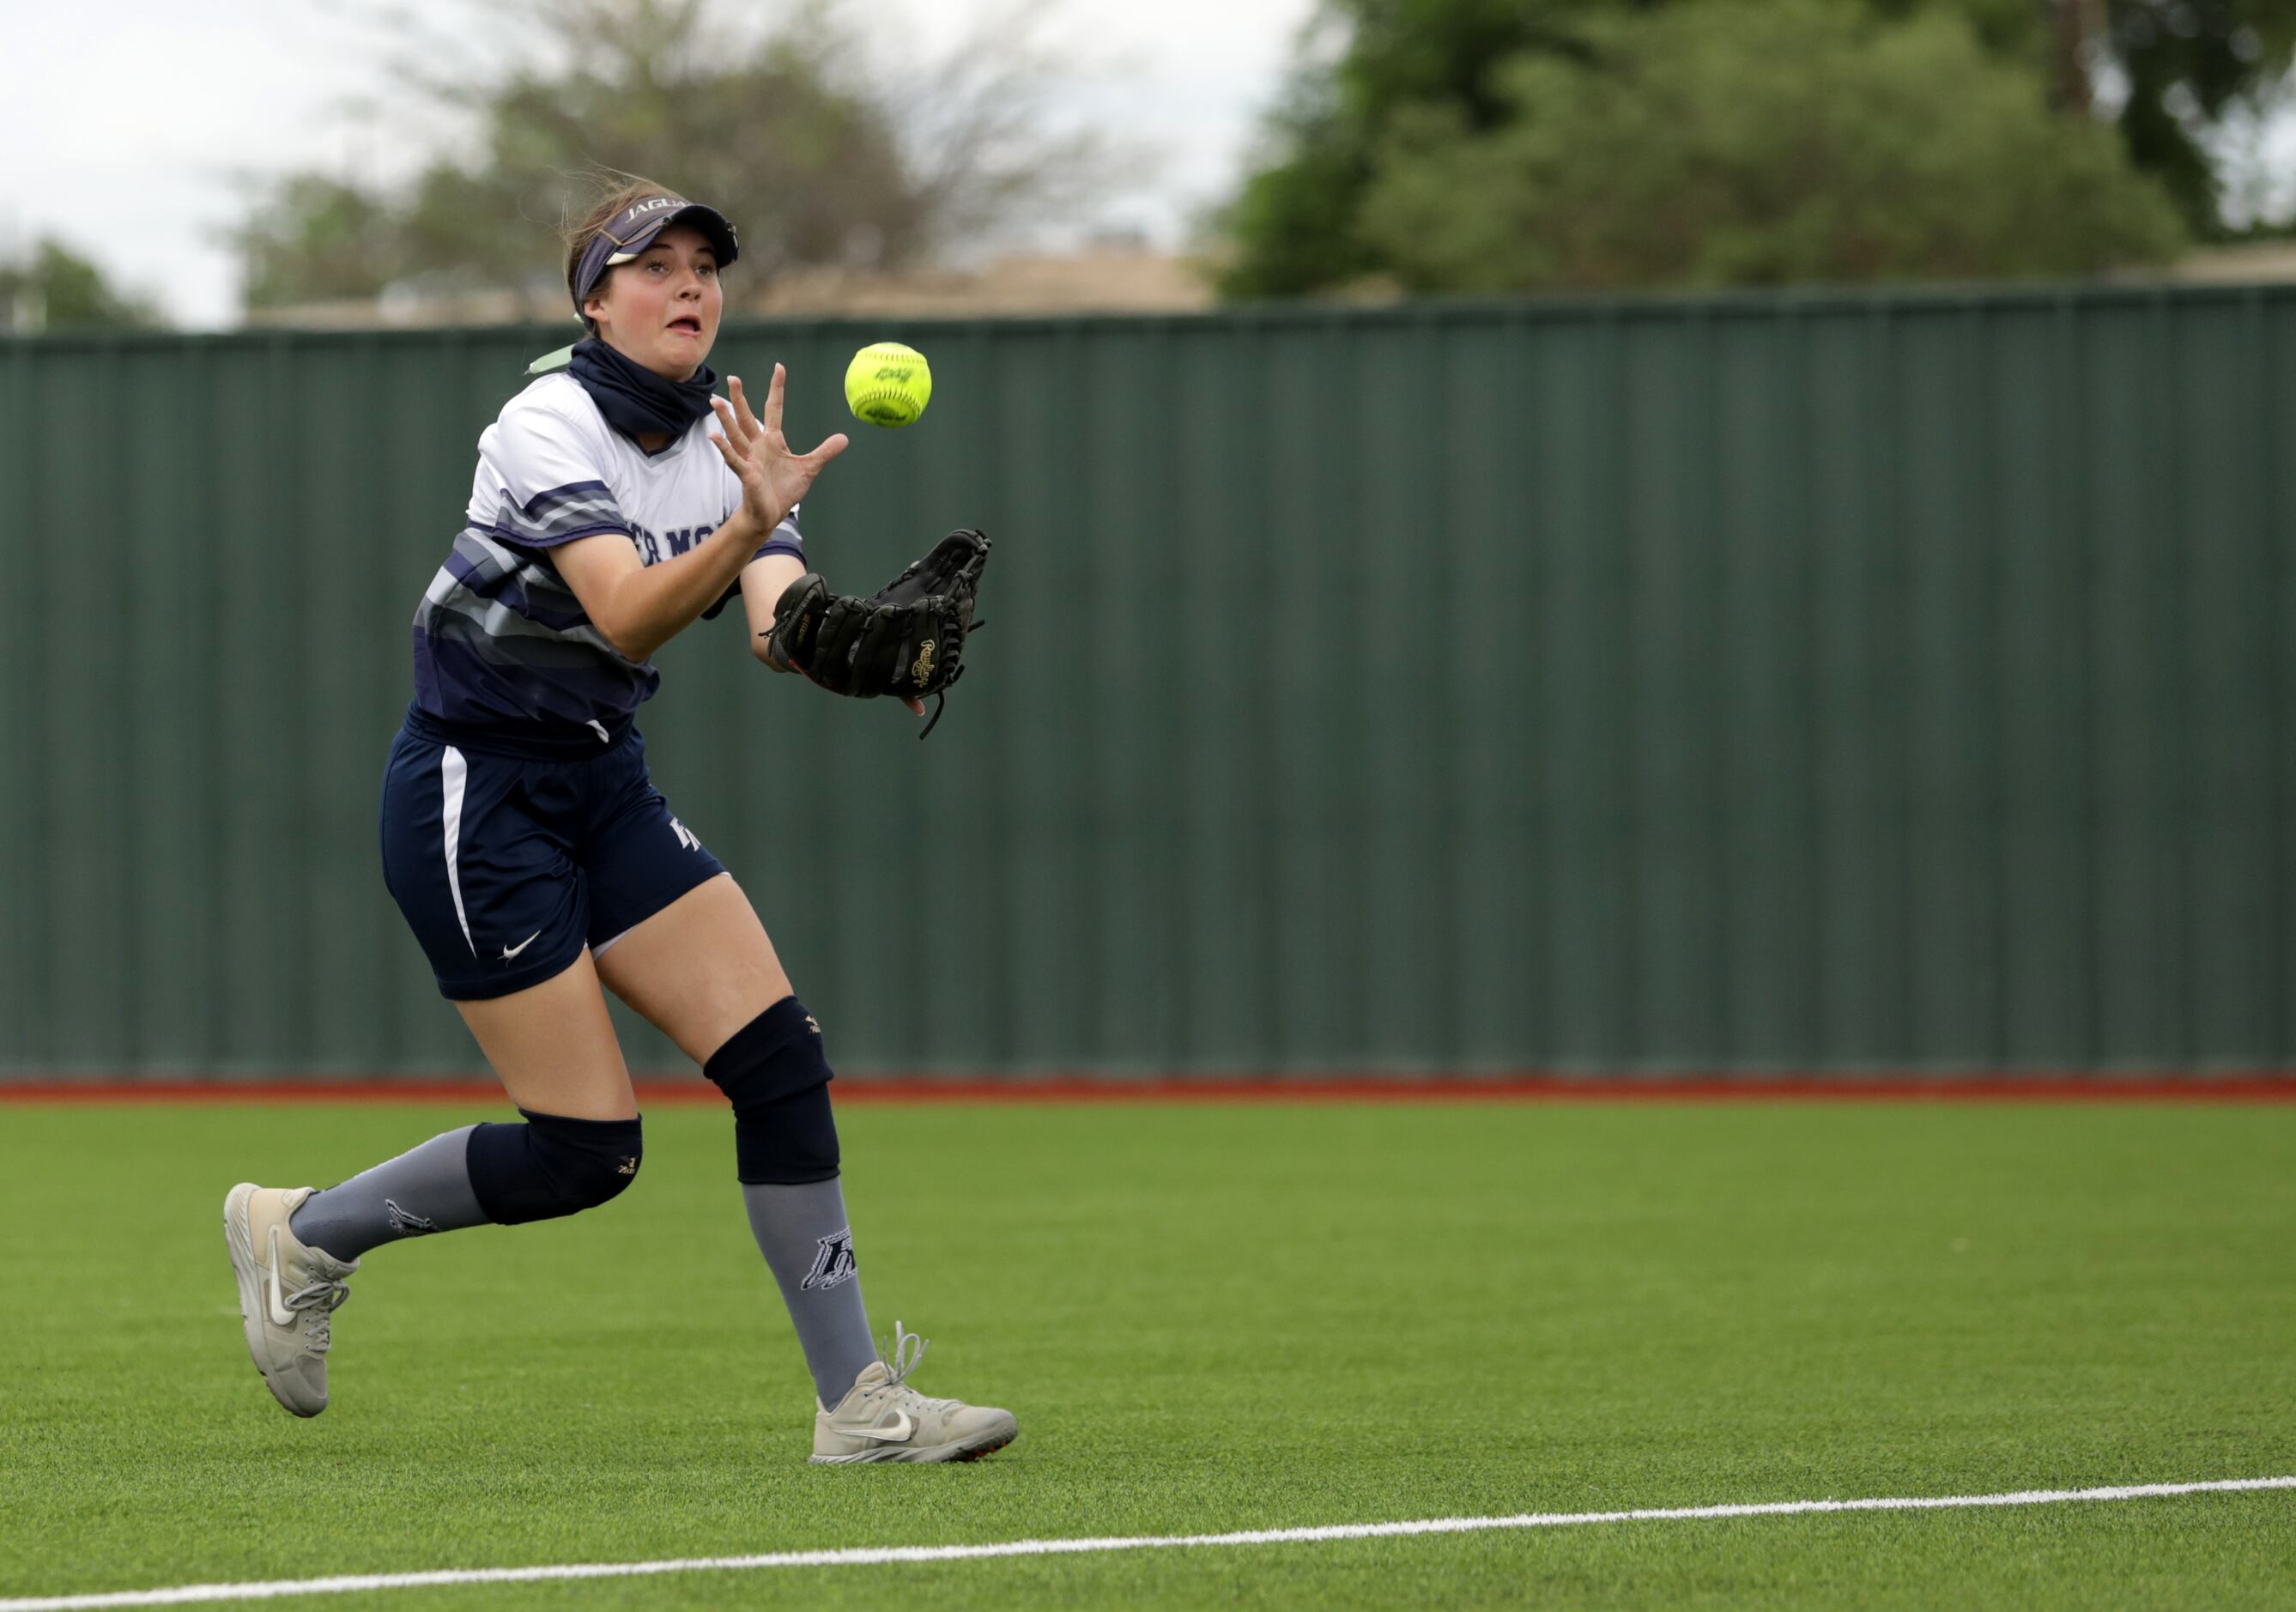 Flower Mound High School player #23, Courtney Cogbill, snags the ball during a softball game...